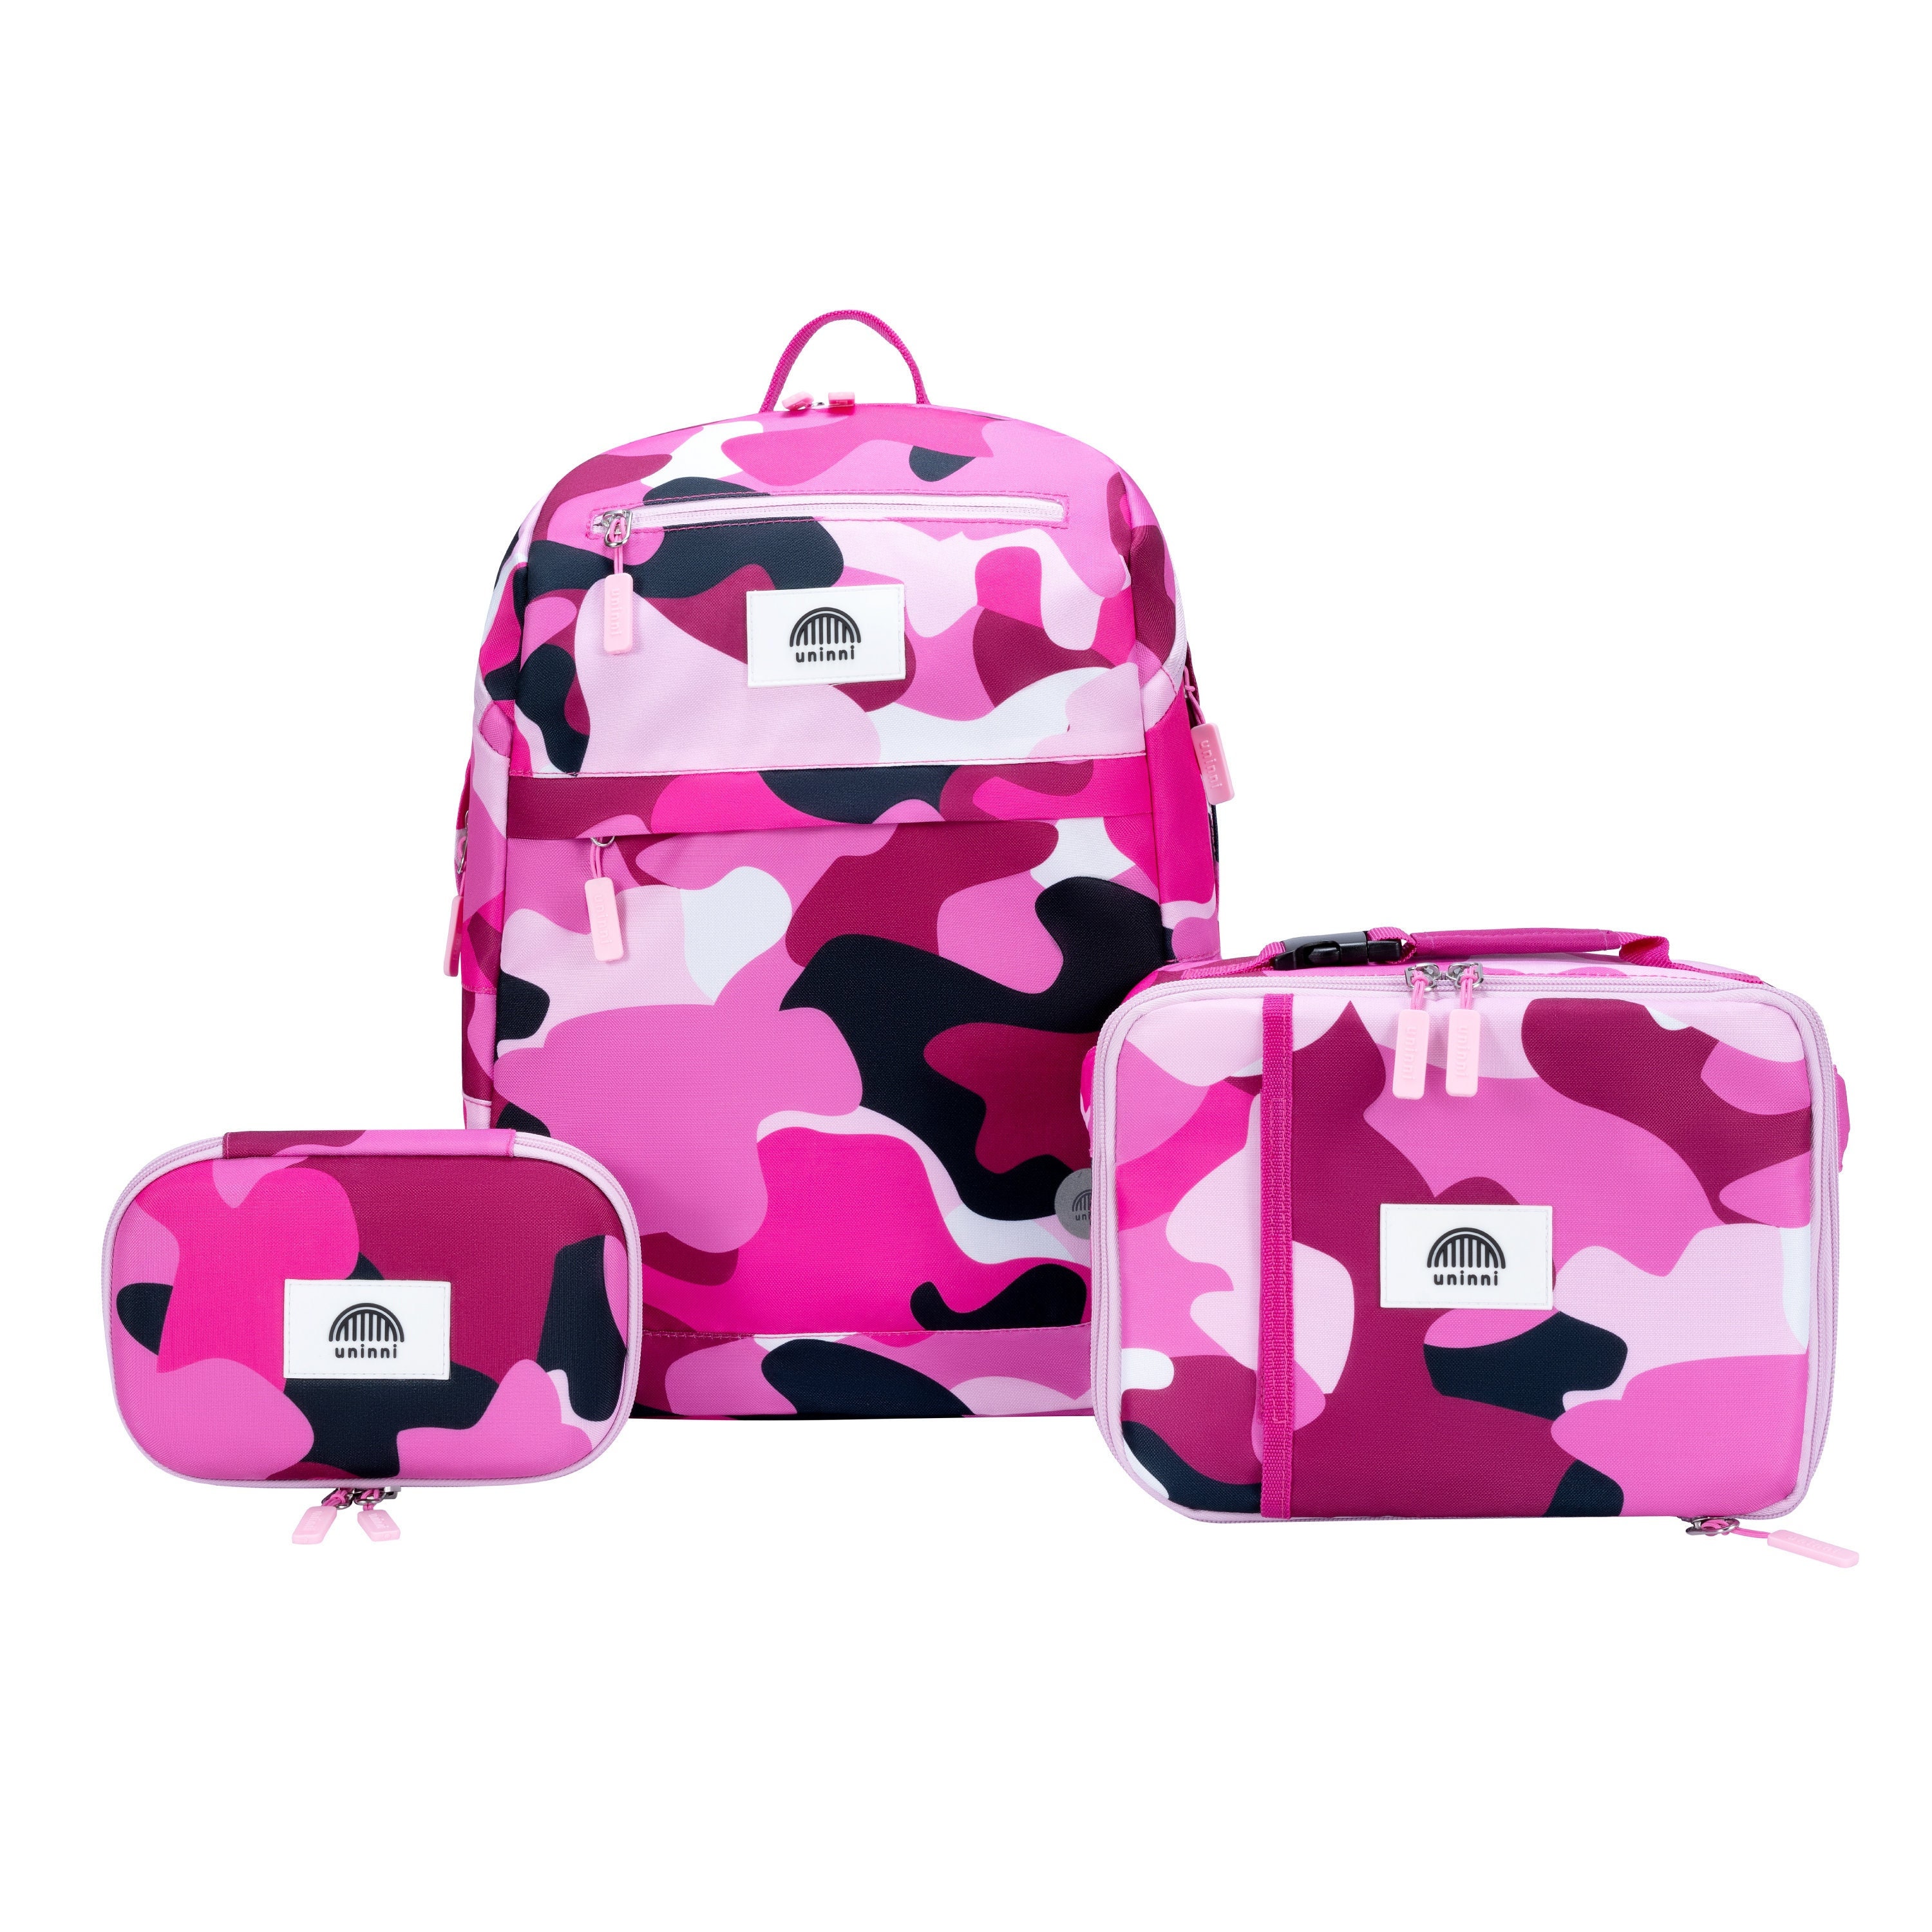 Uninni Insulated Lunch Bag for Kids, Girls & Boys, Reusable and Leak-Resistant - Abstract, Girl's, Size: Small